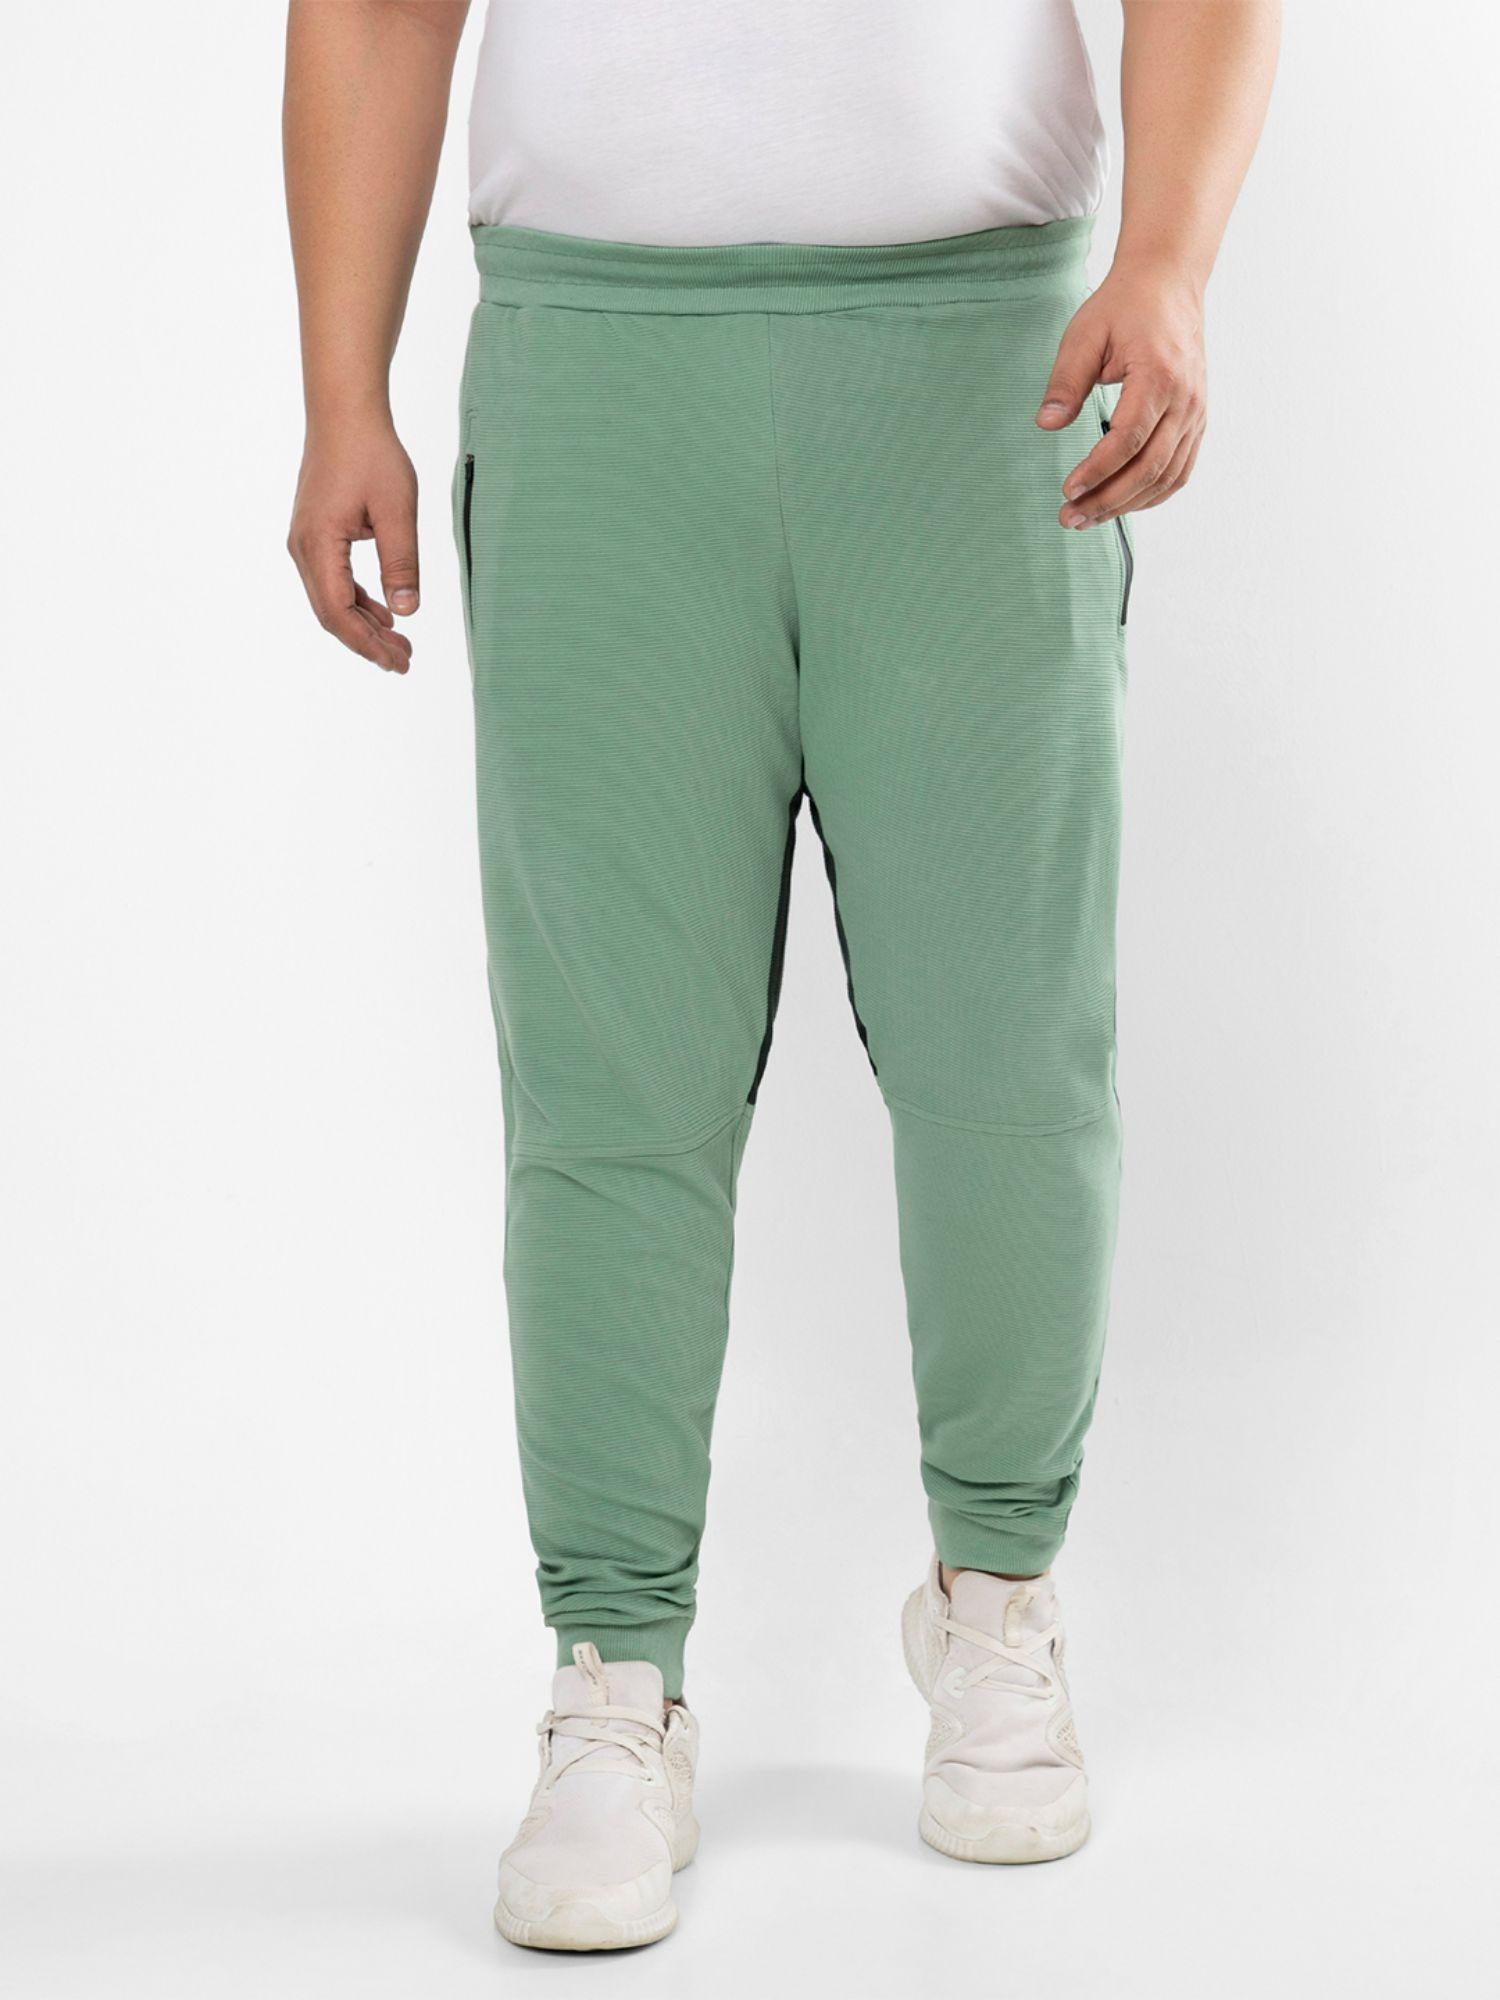 size men's solid stylish evening trackpant,green